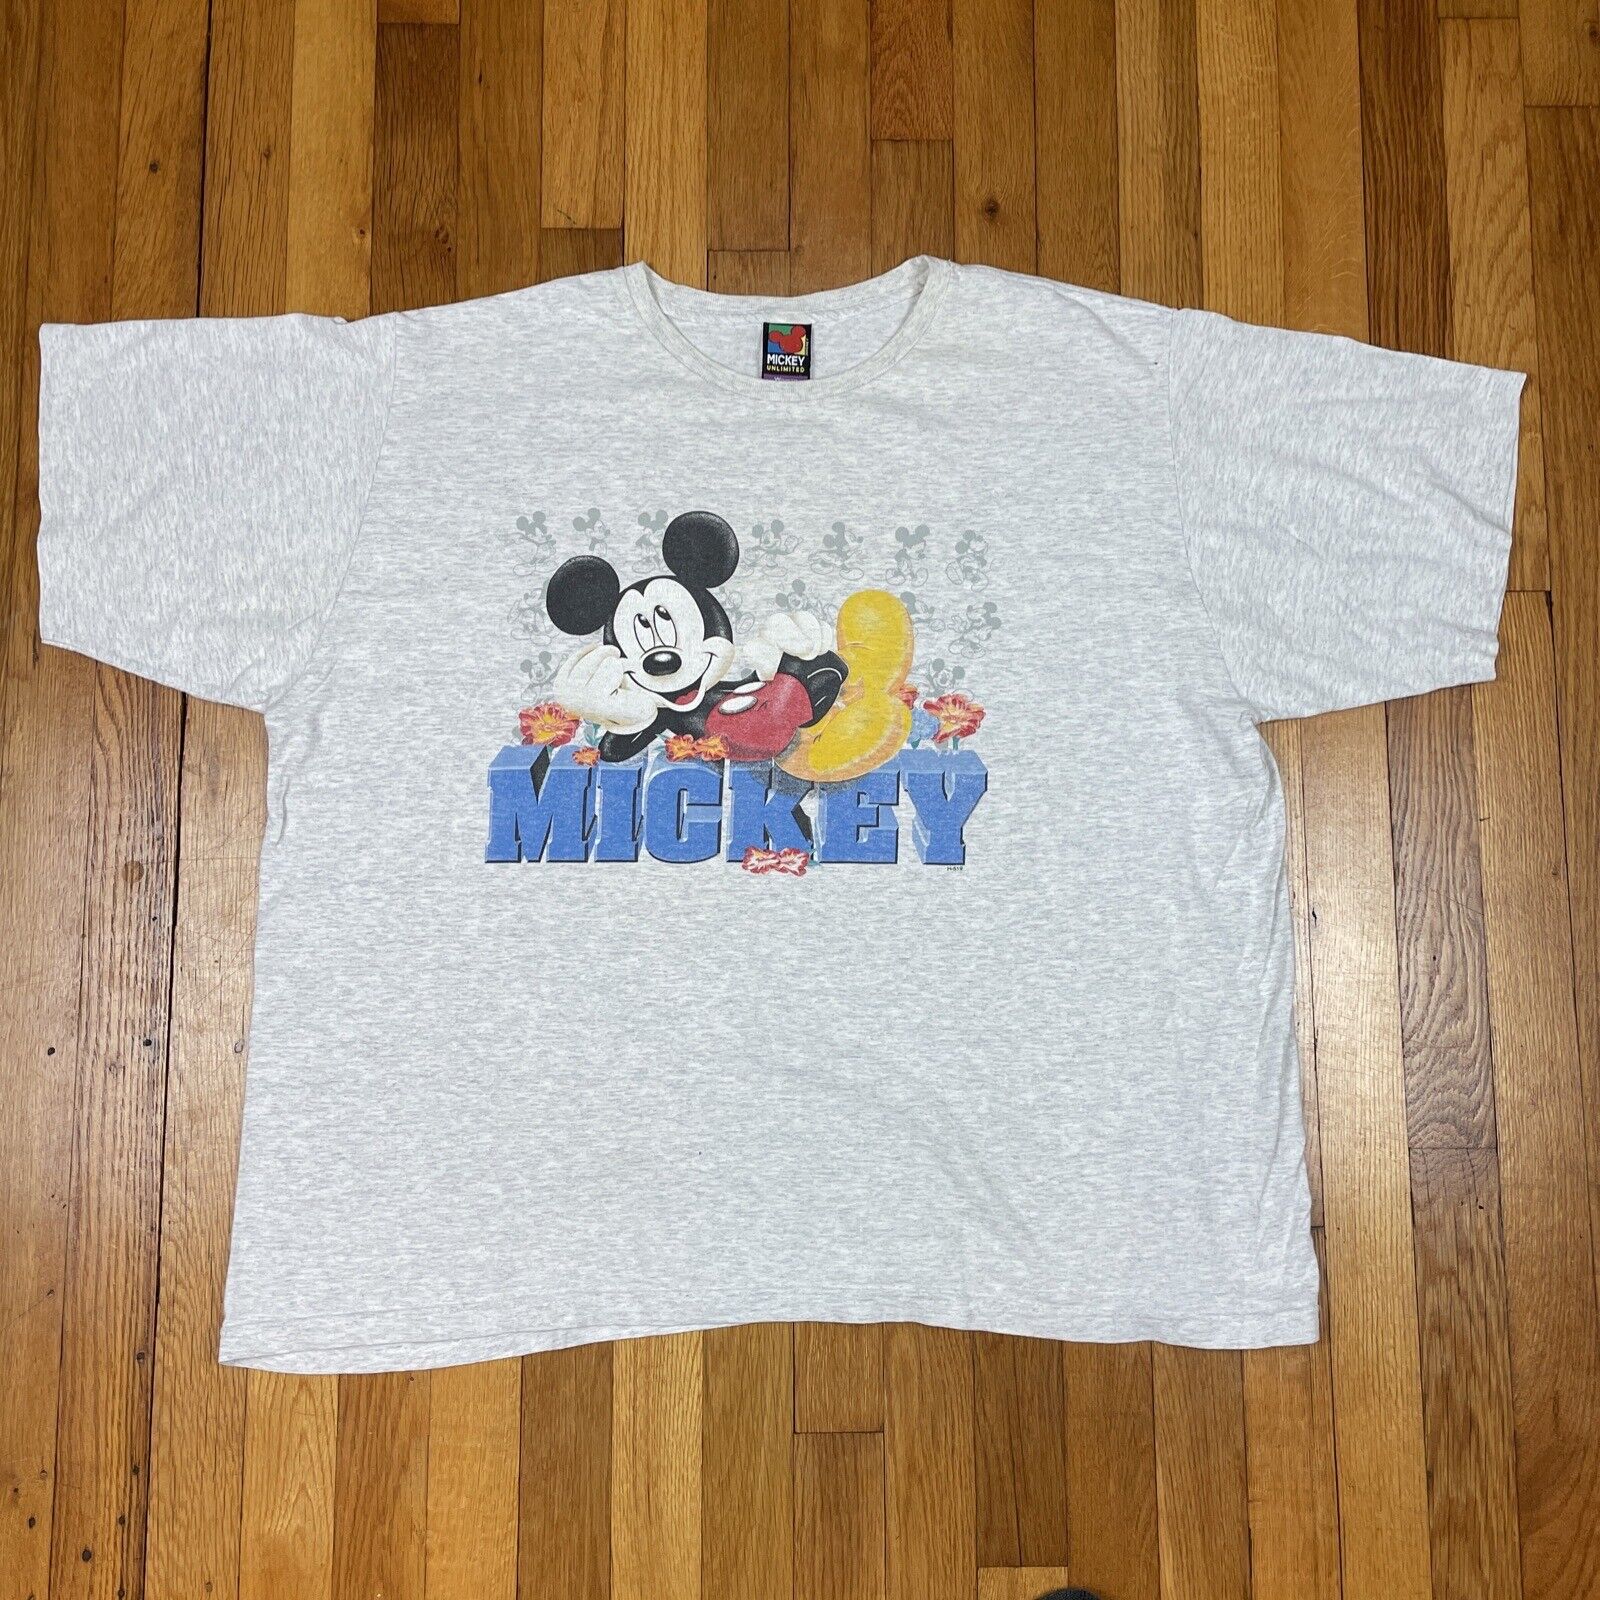 Mickey Unlimited T Shirt Womens 2XL Jerry Leigh Disney Made in USA VTG 90s Gray